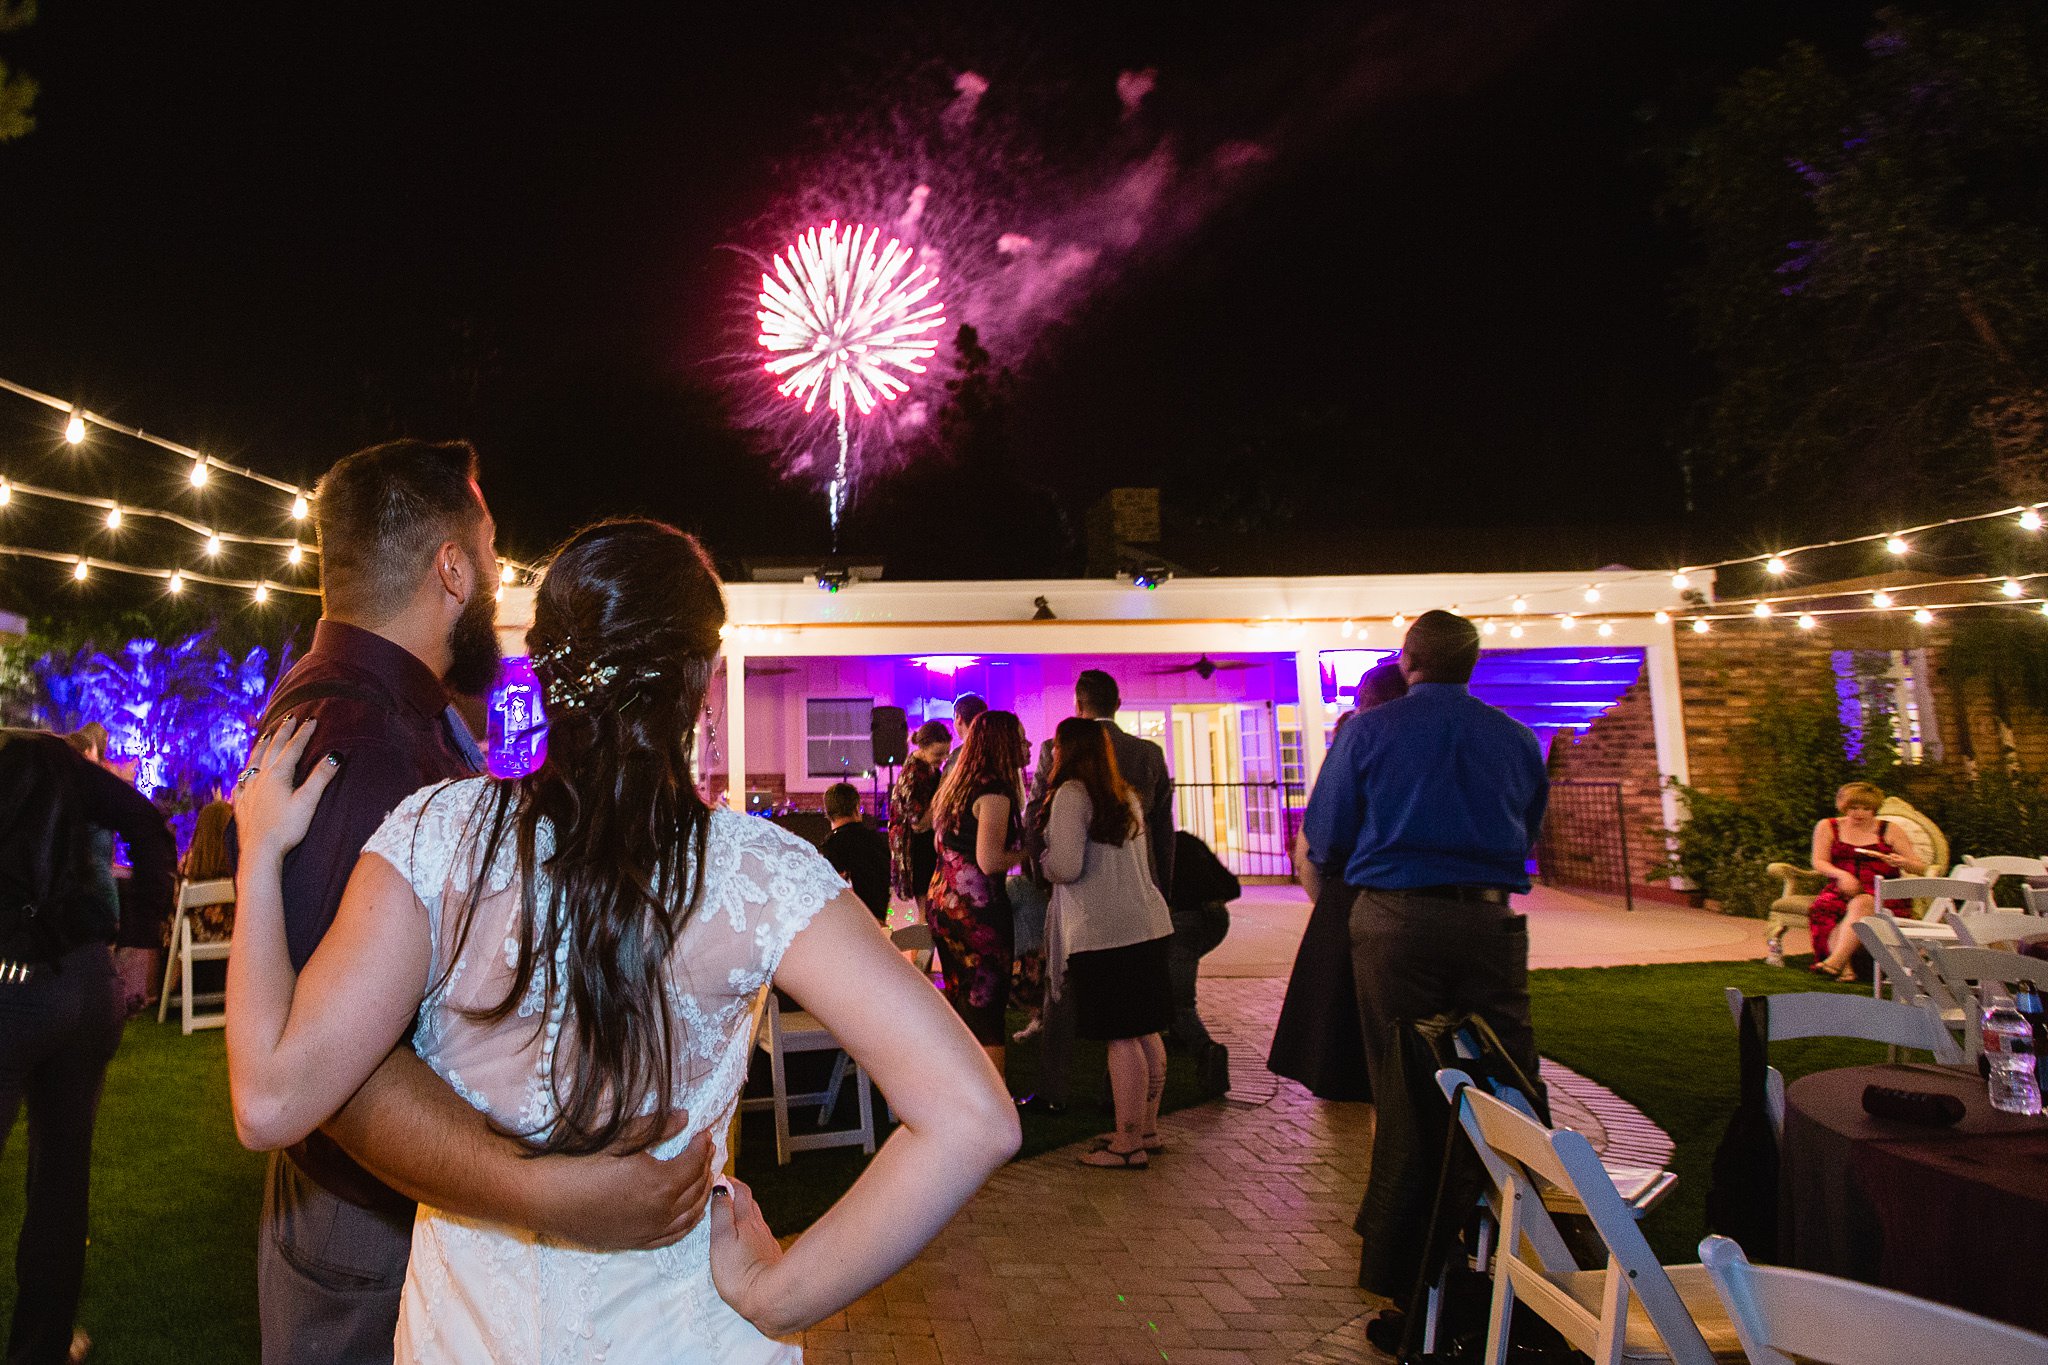 Bride and groom watch fireworks with guests at their wedding reception at Schnepf Farms by Phoenix wedding photographer PMA Photography.